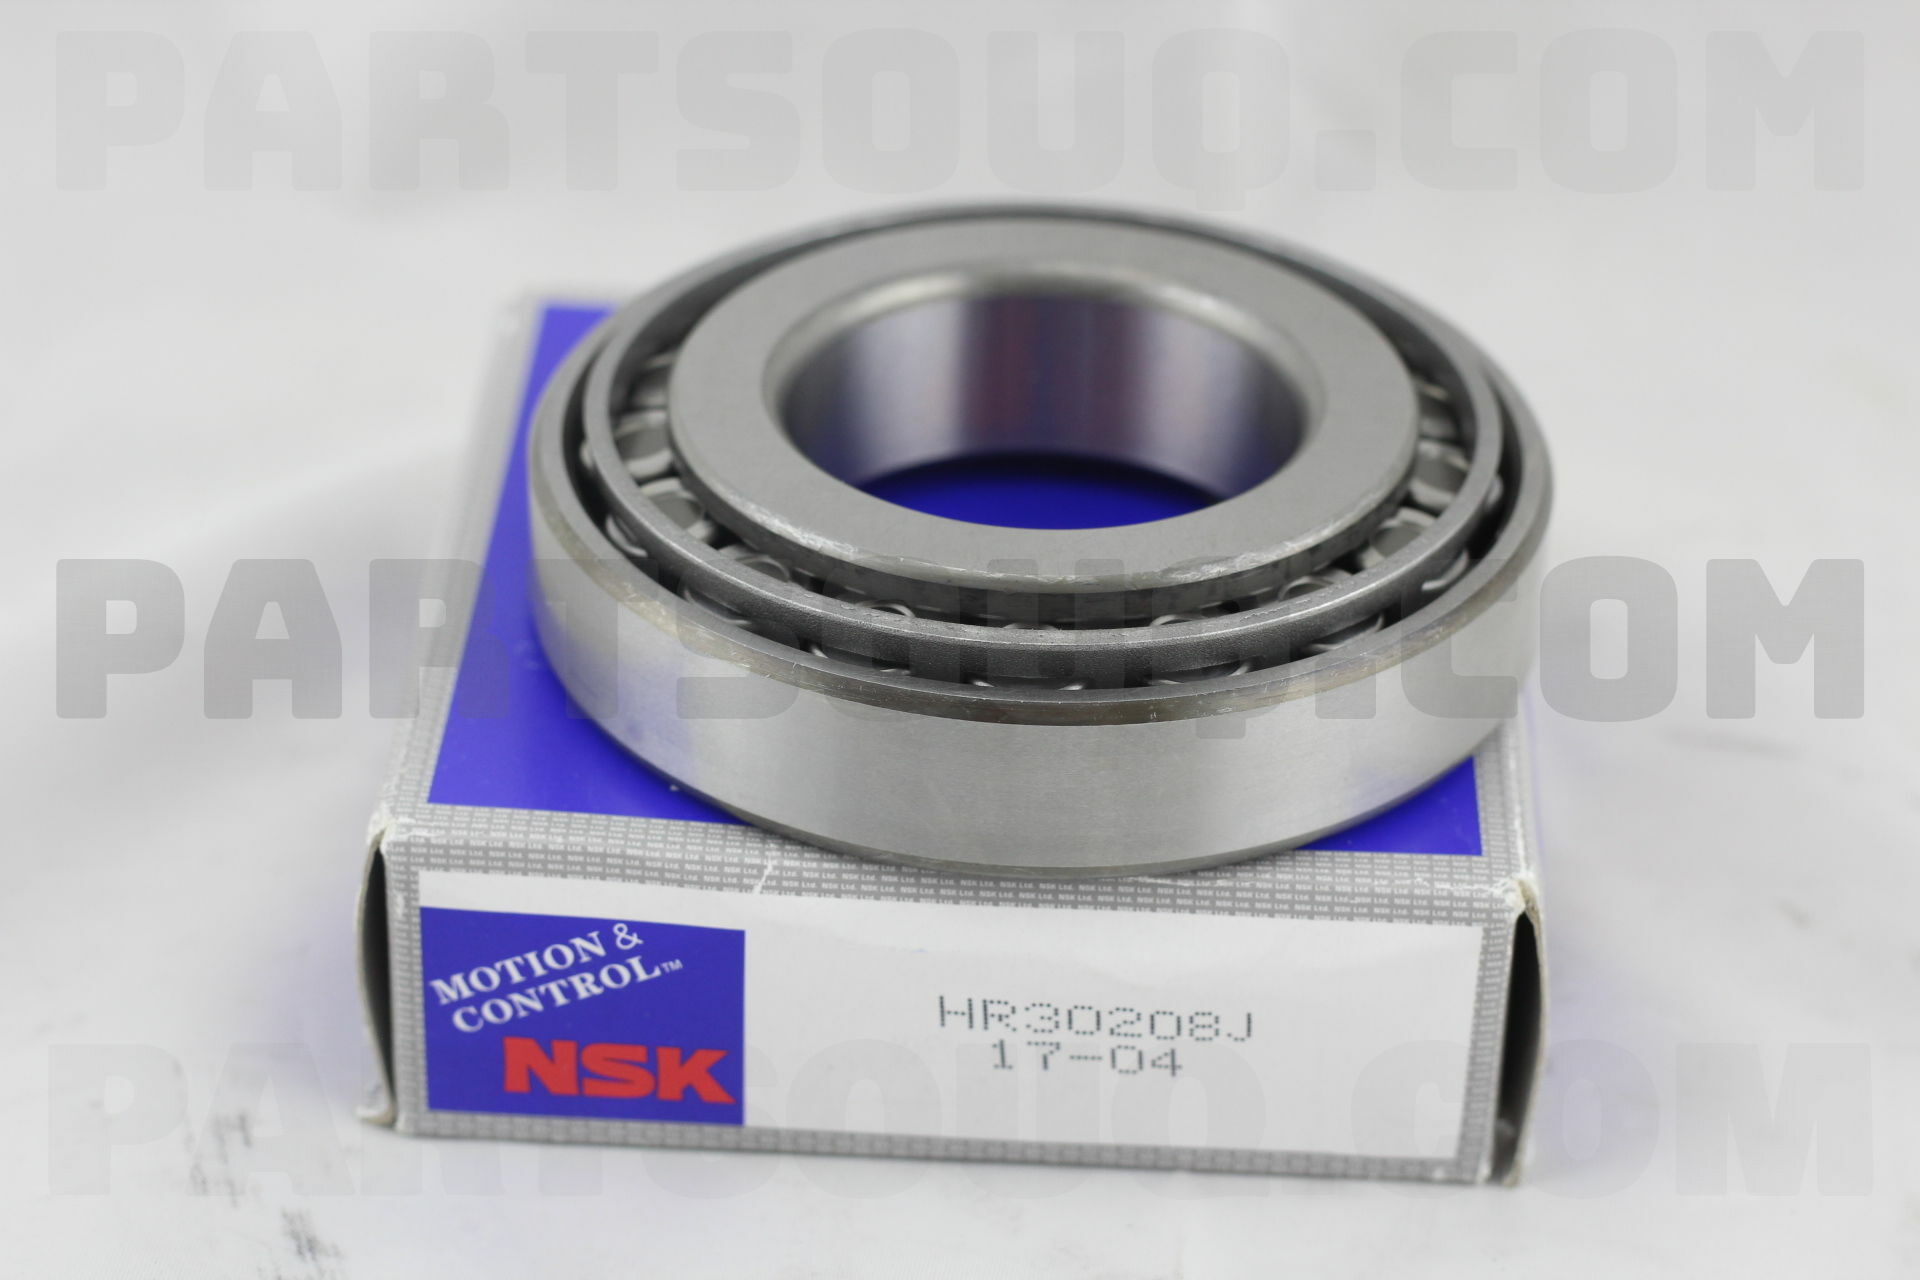 BEARING-DIFFERENTIAL SIDE 4021085000 | Nissan Parts | PartSouq